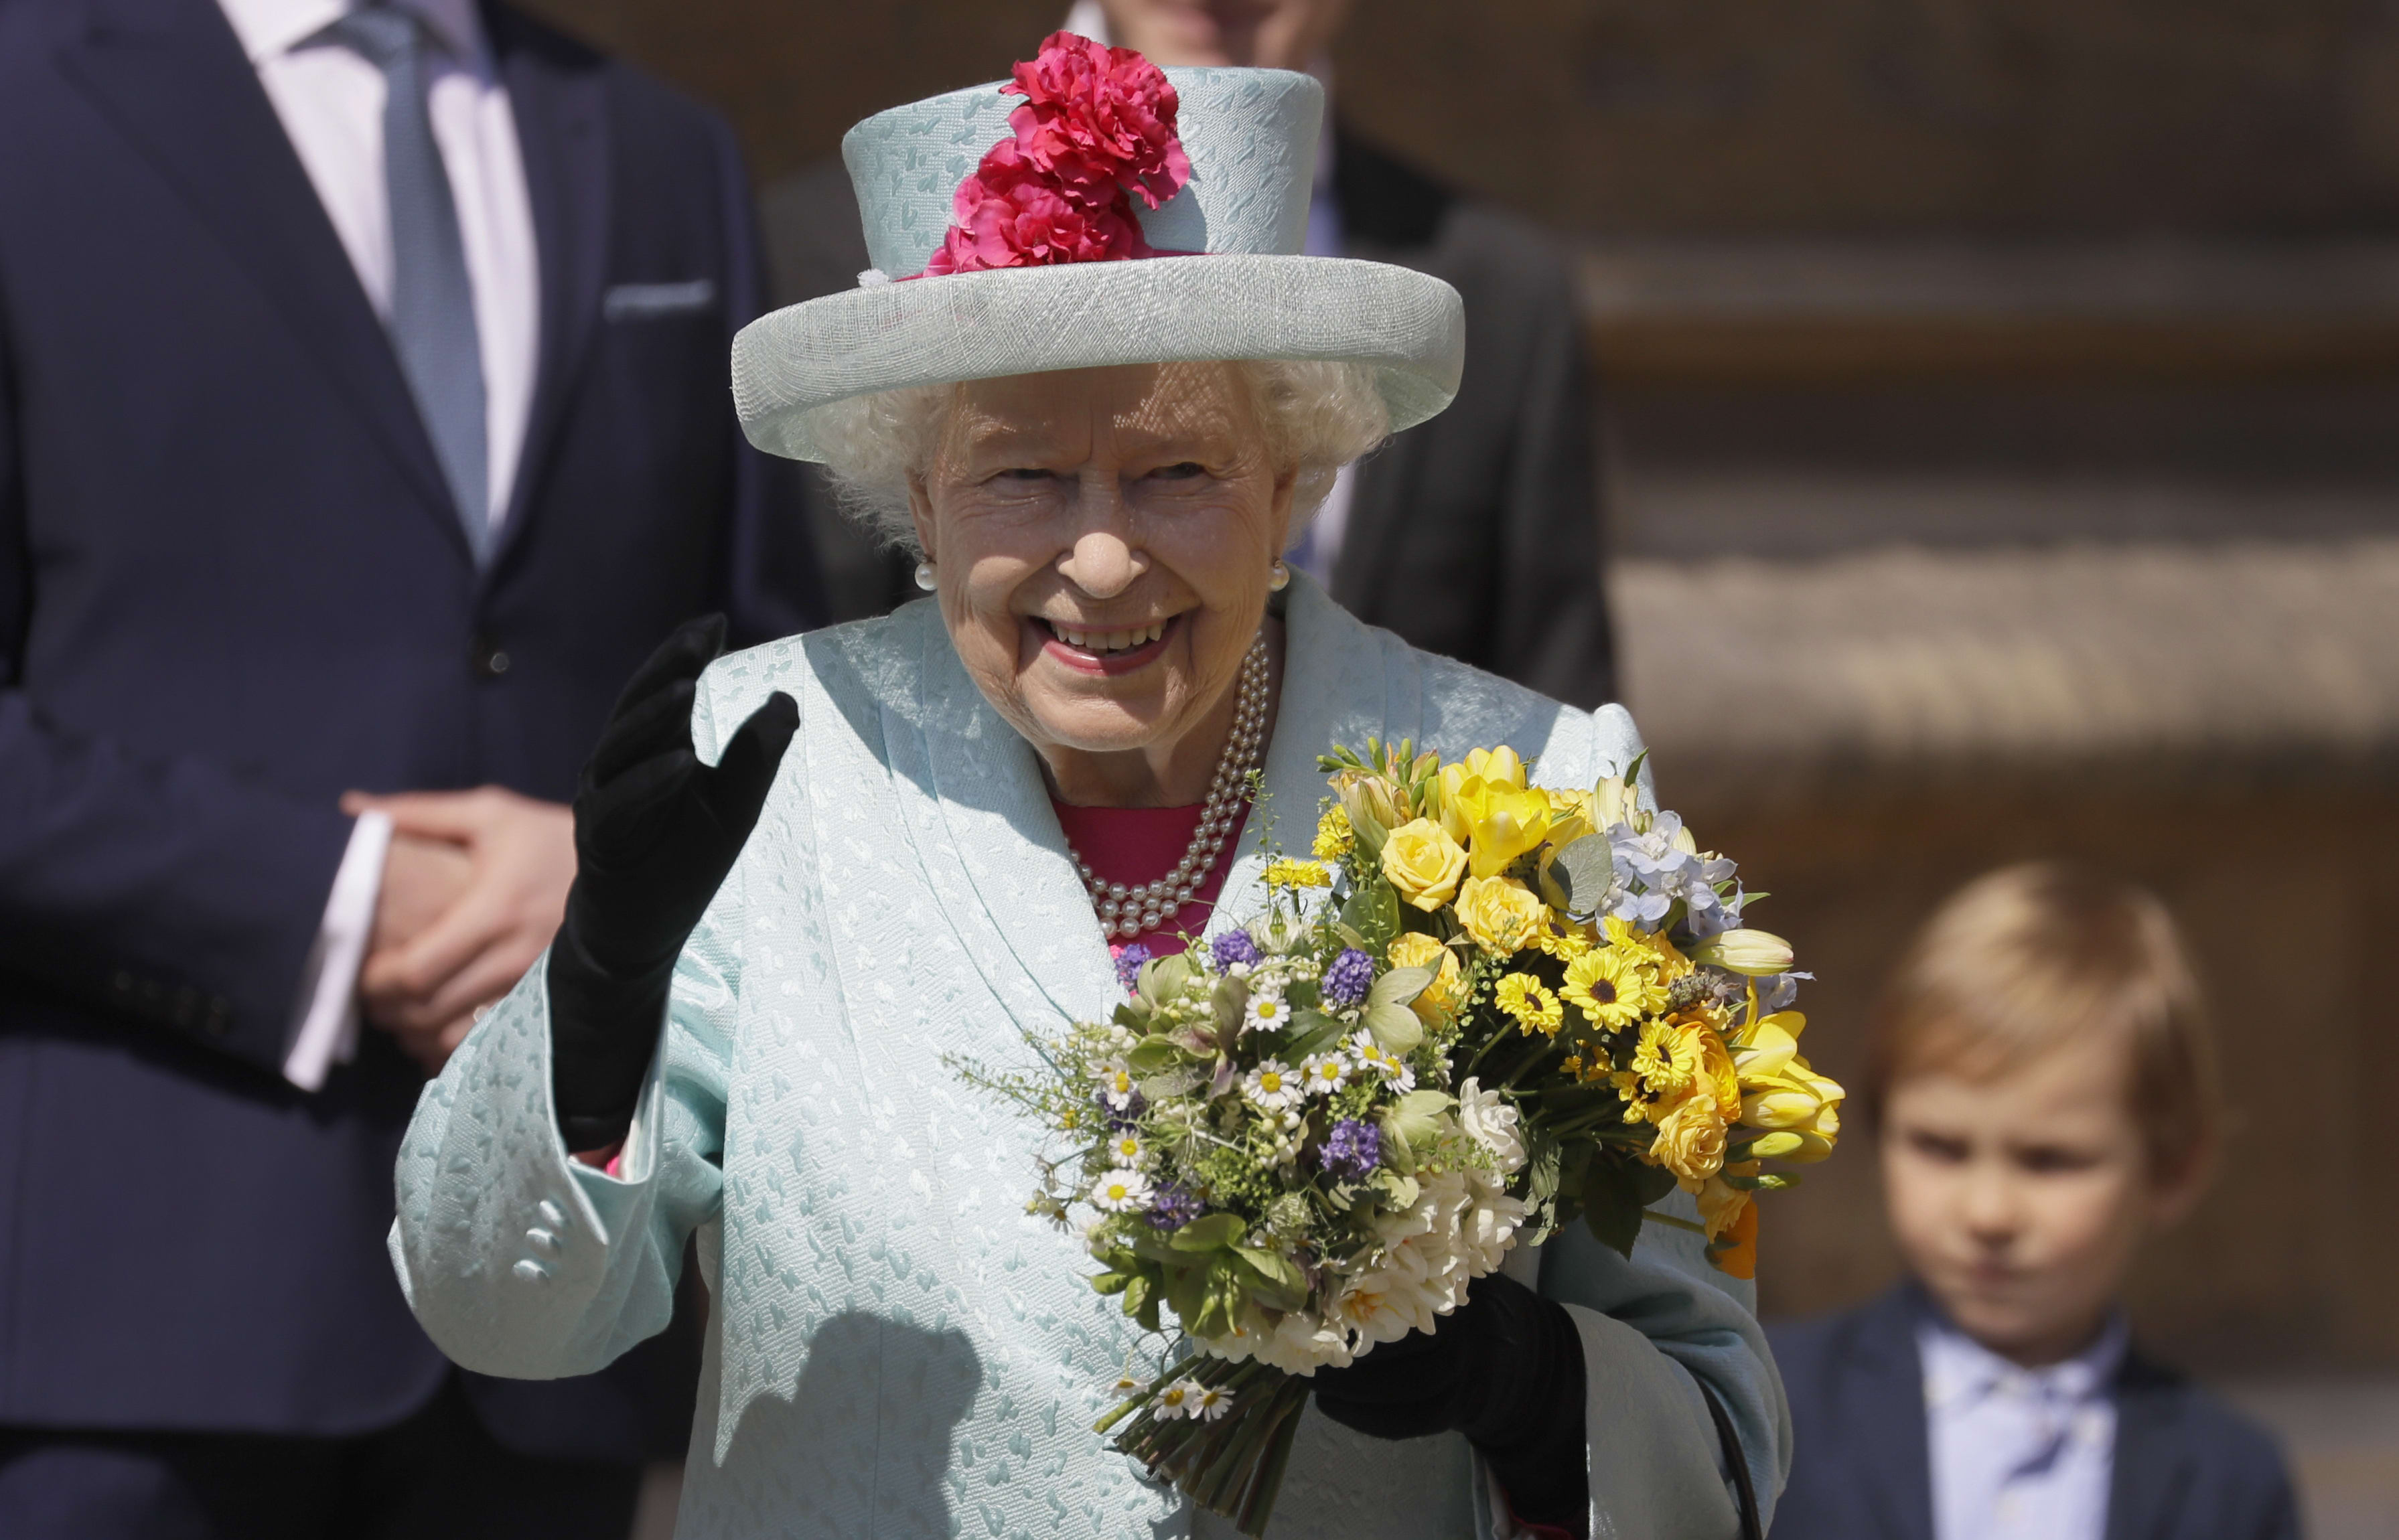 Queen Elizabeth II smiles and waves to members of the public as she leaves after attending the Easter Mattins Service at St. George's Chapel, Windsor Castle on April 21, 2019.